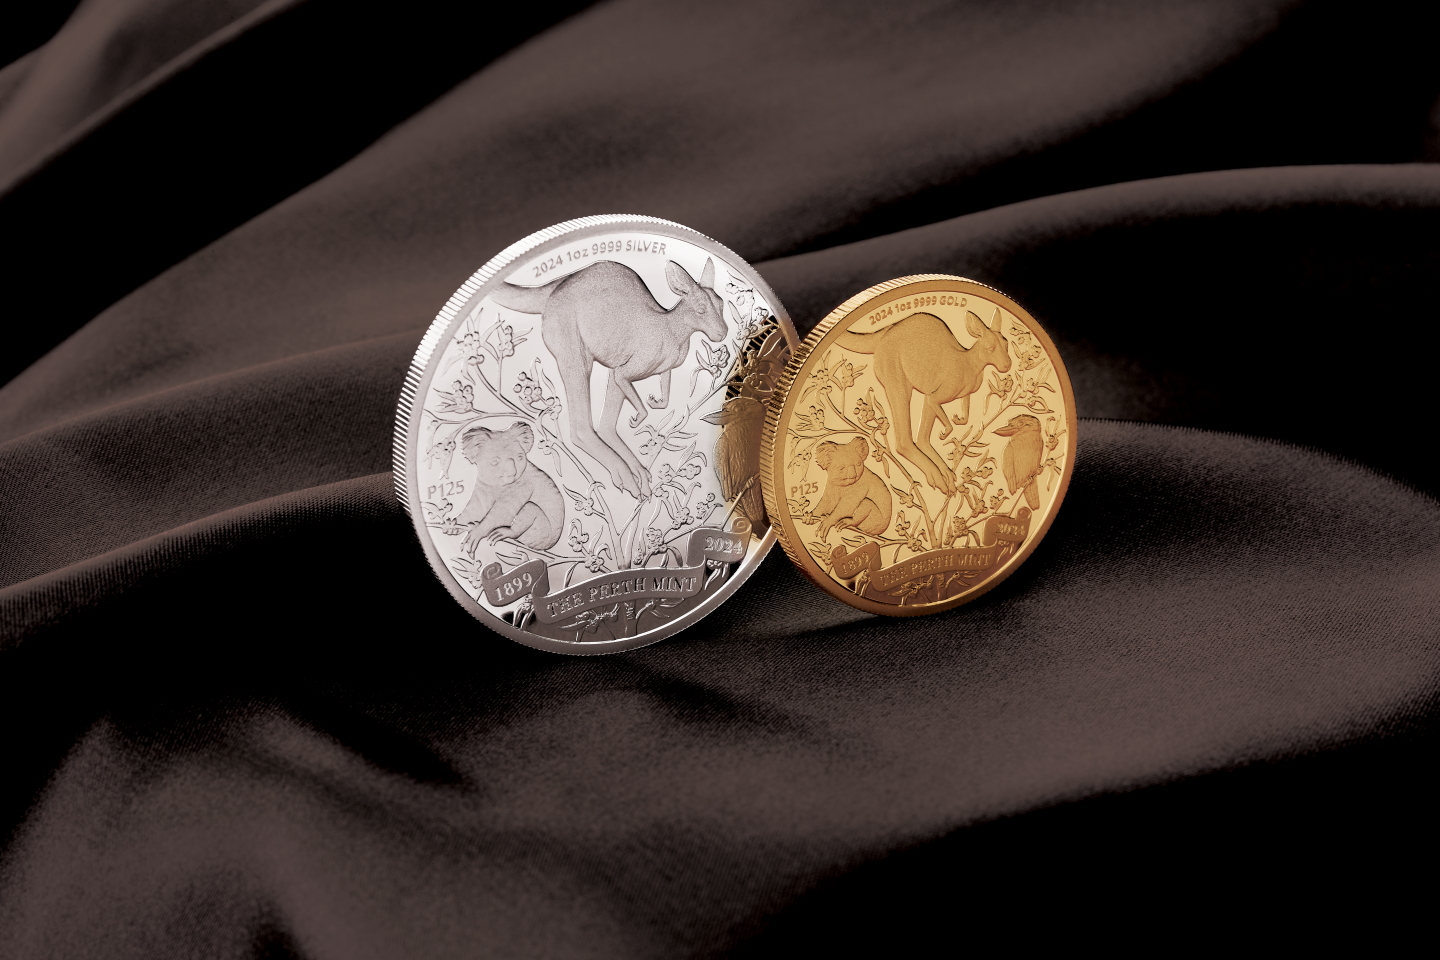 Perth Mint 125th Anniversary coins in gold and silver